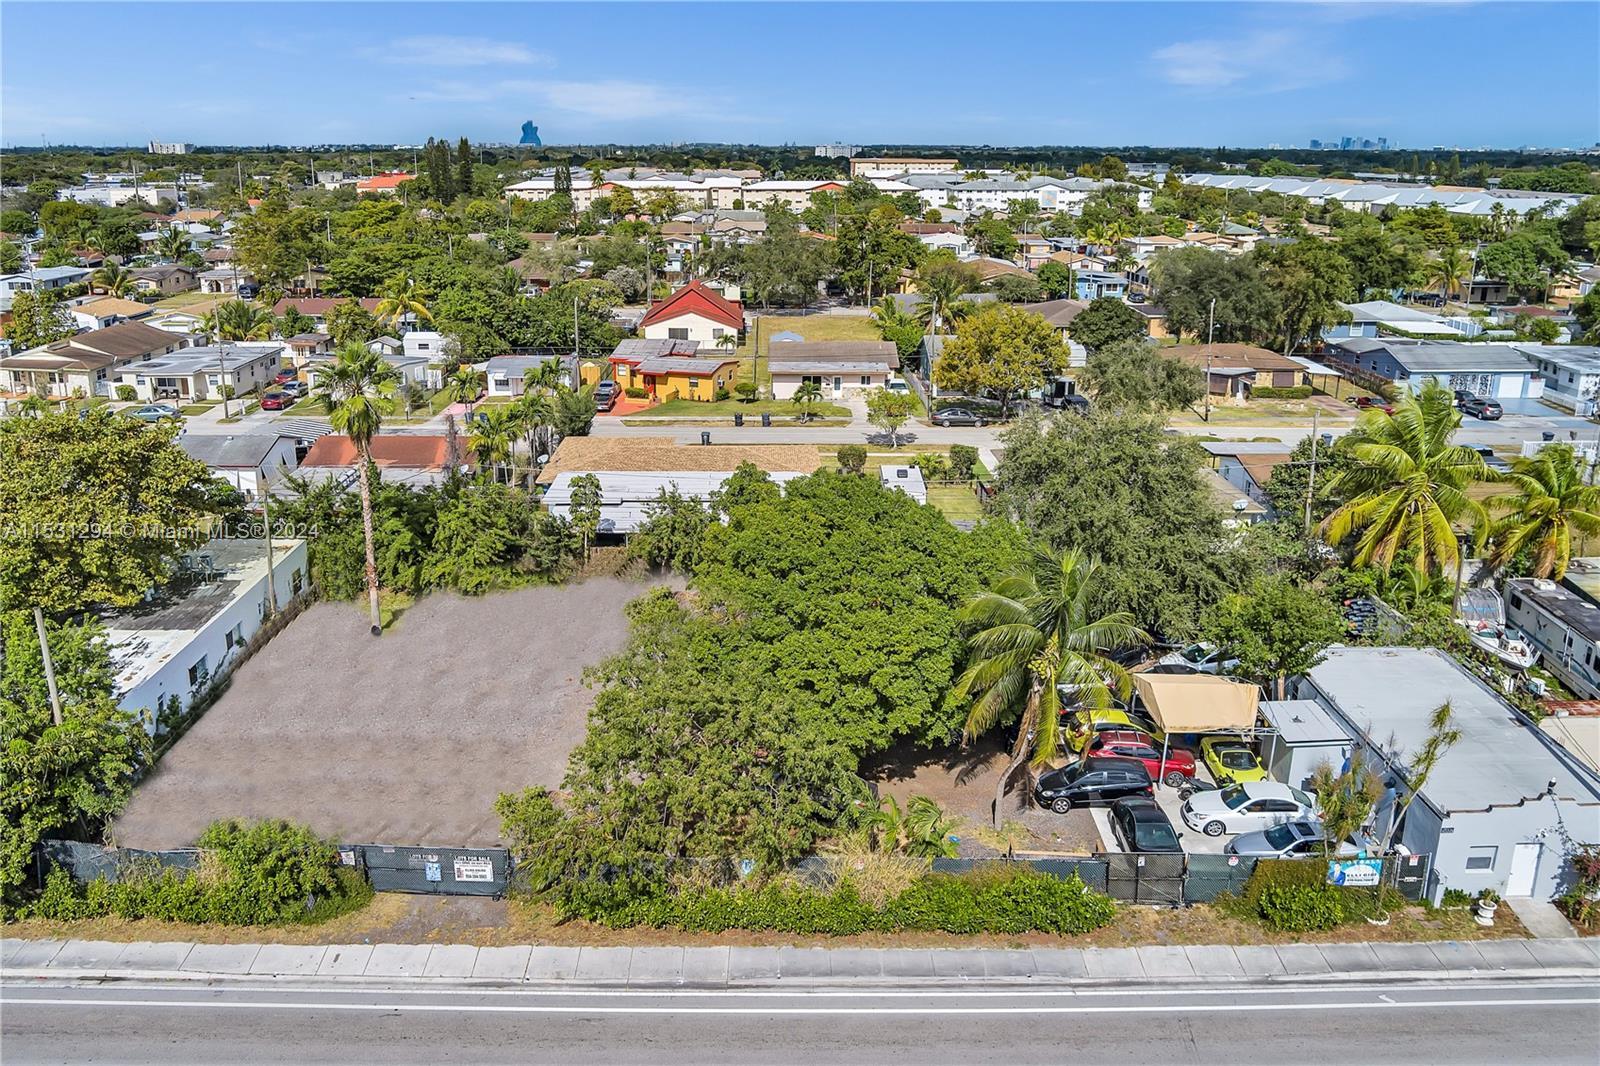 Photo of 5337 Pembroke Rd in Hollywood, FL